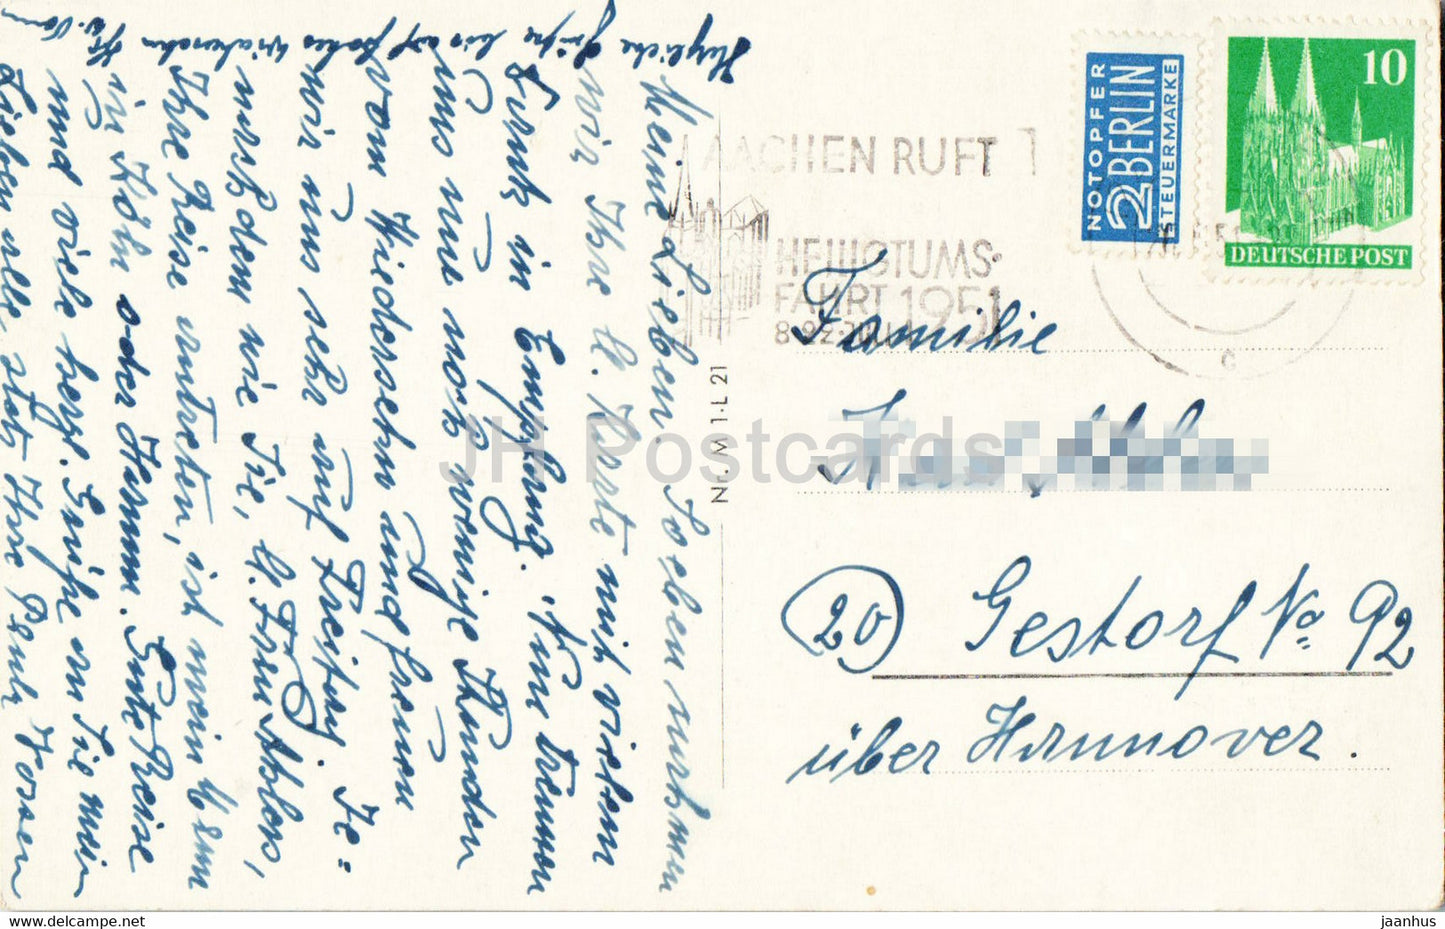 Aachen - Dom - cathedral - old postcard - 1951 - Germany - used